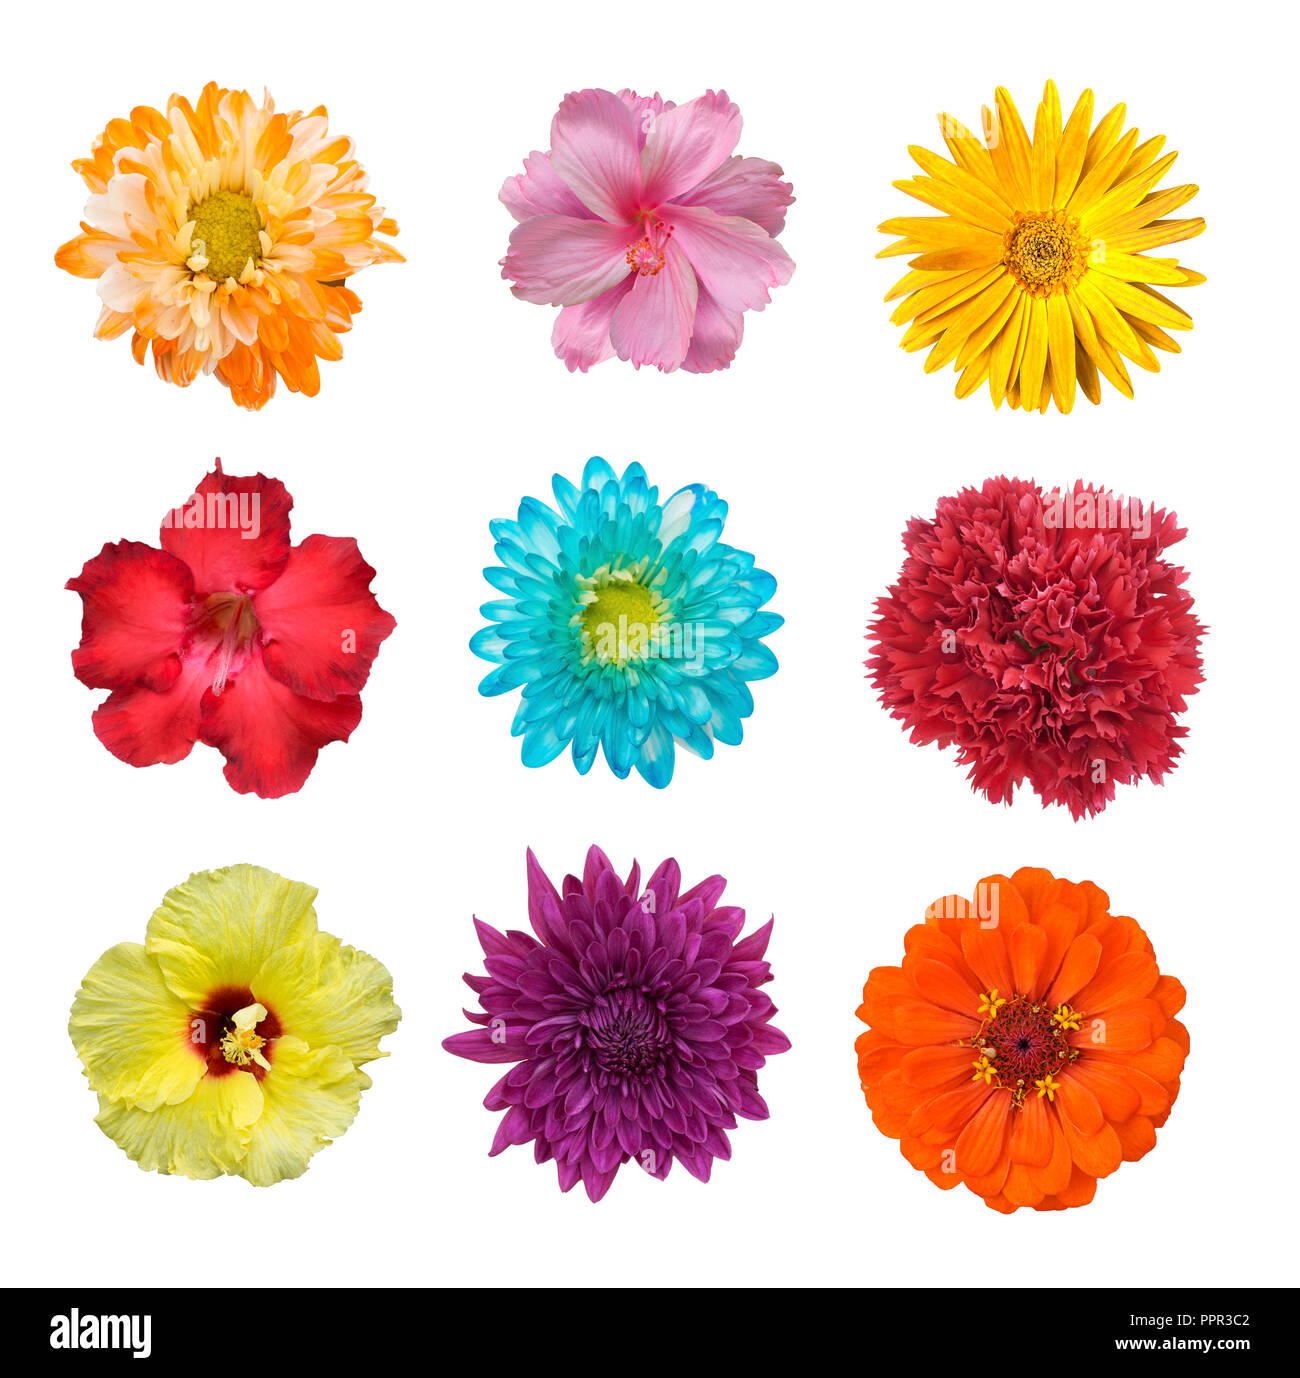 Big Selection of Various Flowers Isolated on White Background. Red, Pink, Yellow, blue Colors including rose, dahlia, marigold, zinnia, straw flower,  Stock Photo